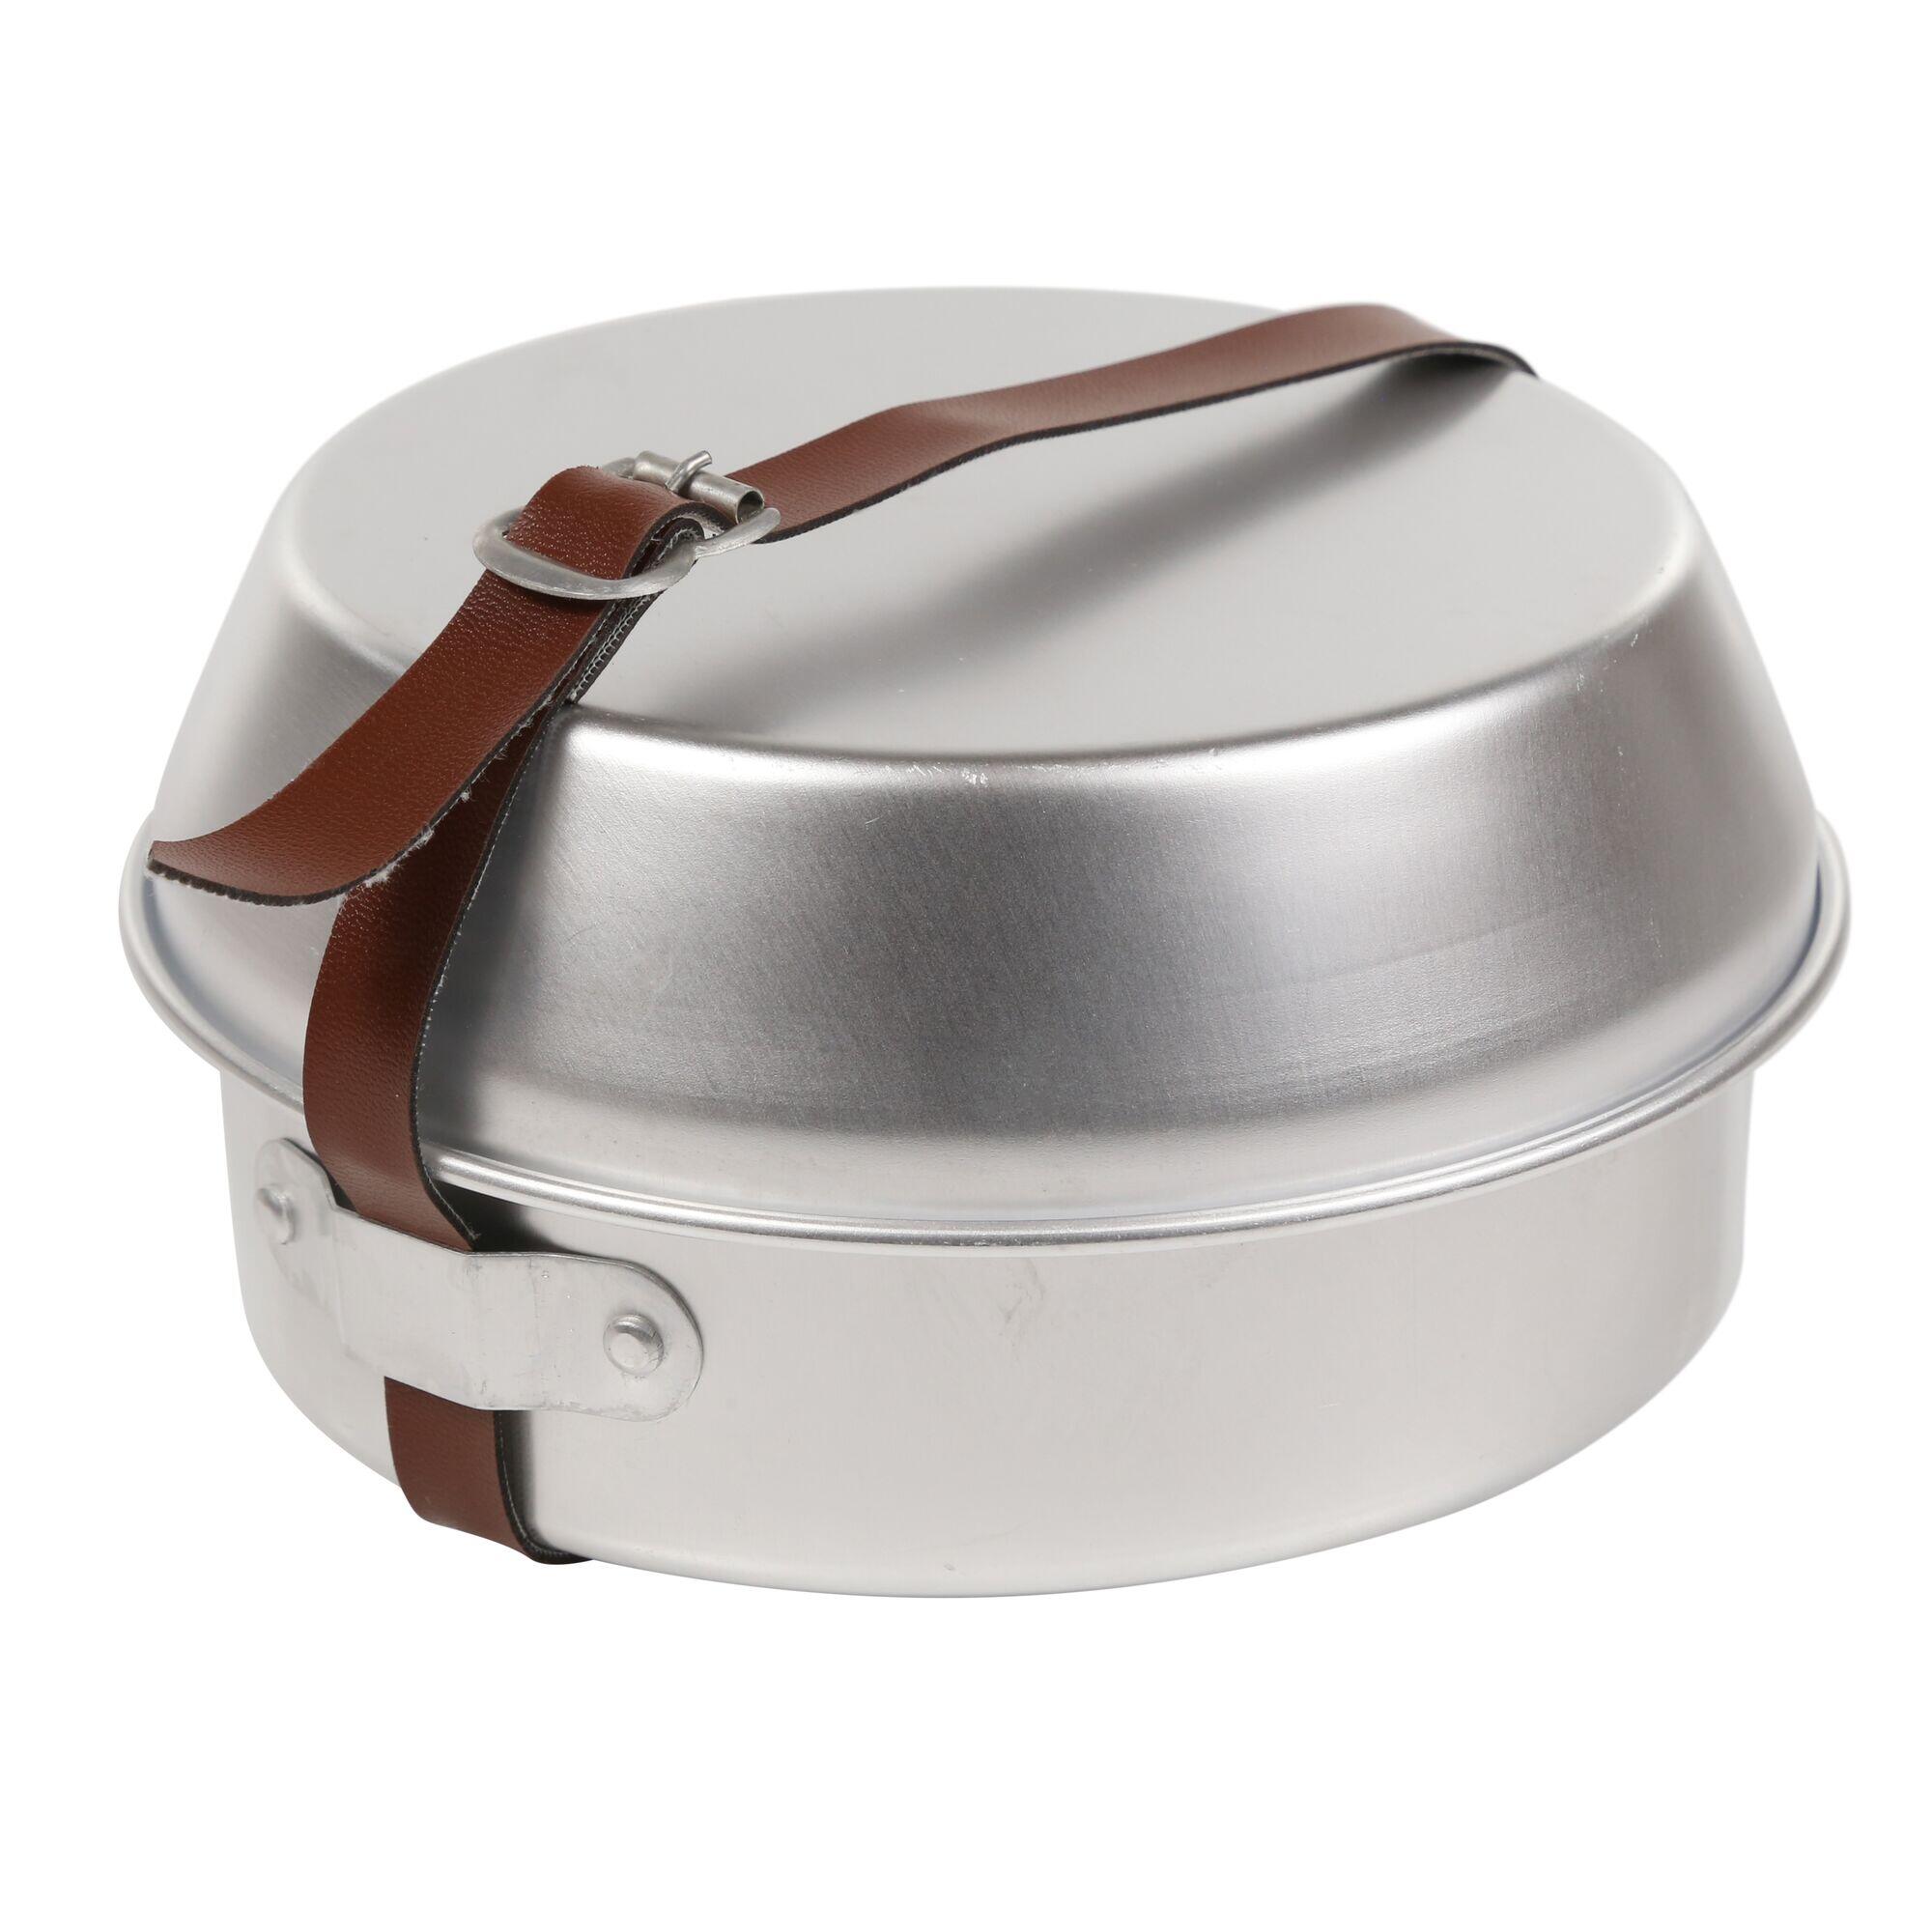 Compact Adults' Camping Cookset - Silver 5/5